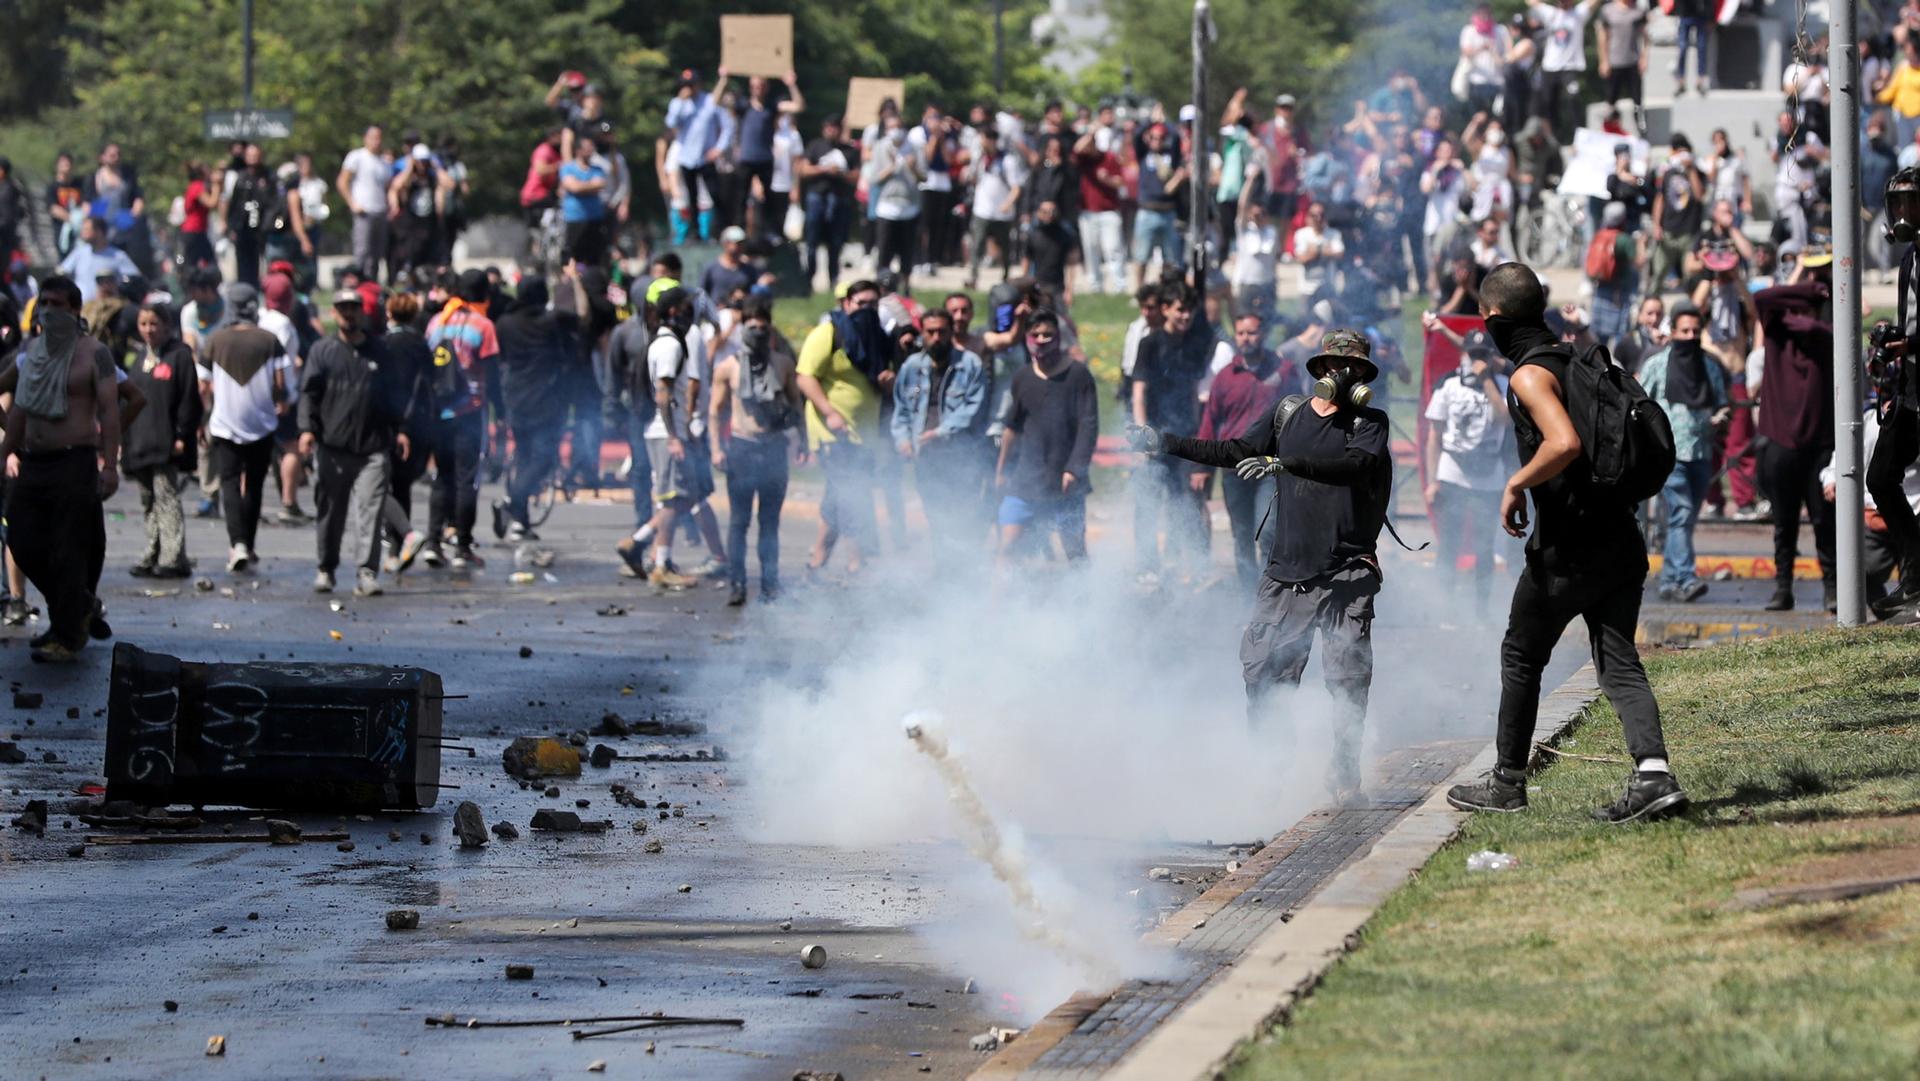 A crowd of demonstrators are shown amassed in the street with a tear gas canister bouncing in the middle of the frame.